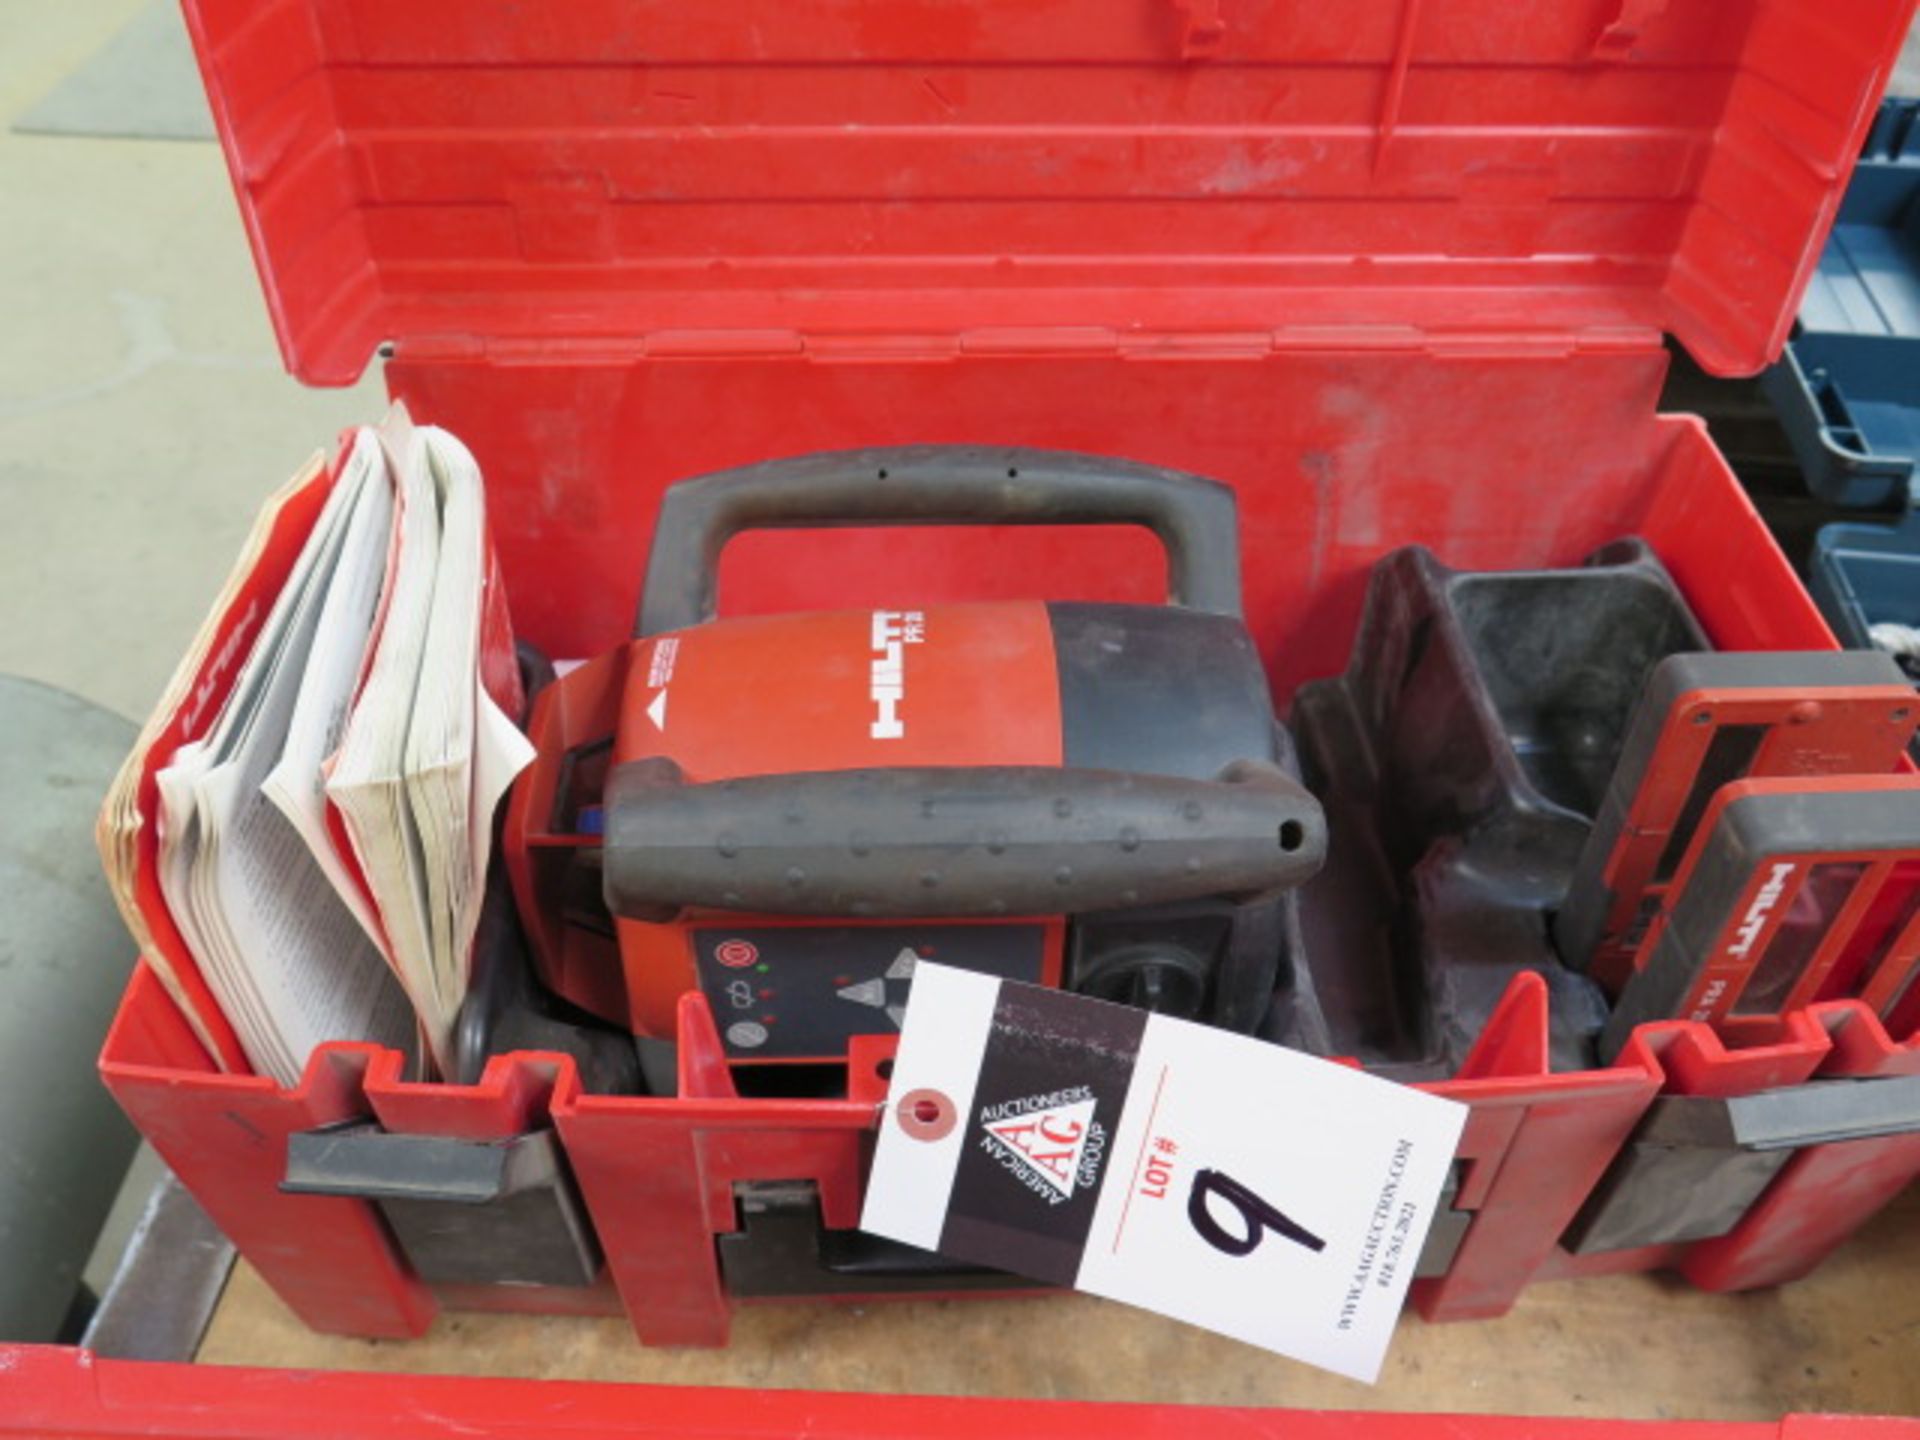 Hilti PR 20 Rotating Laser (SOLD AS-IS - NO WARRANTY)